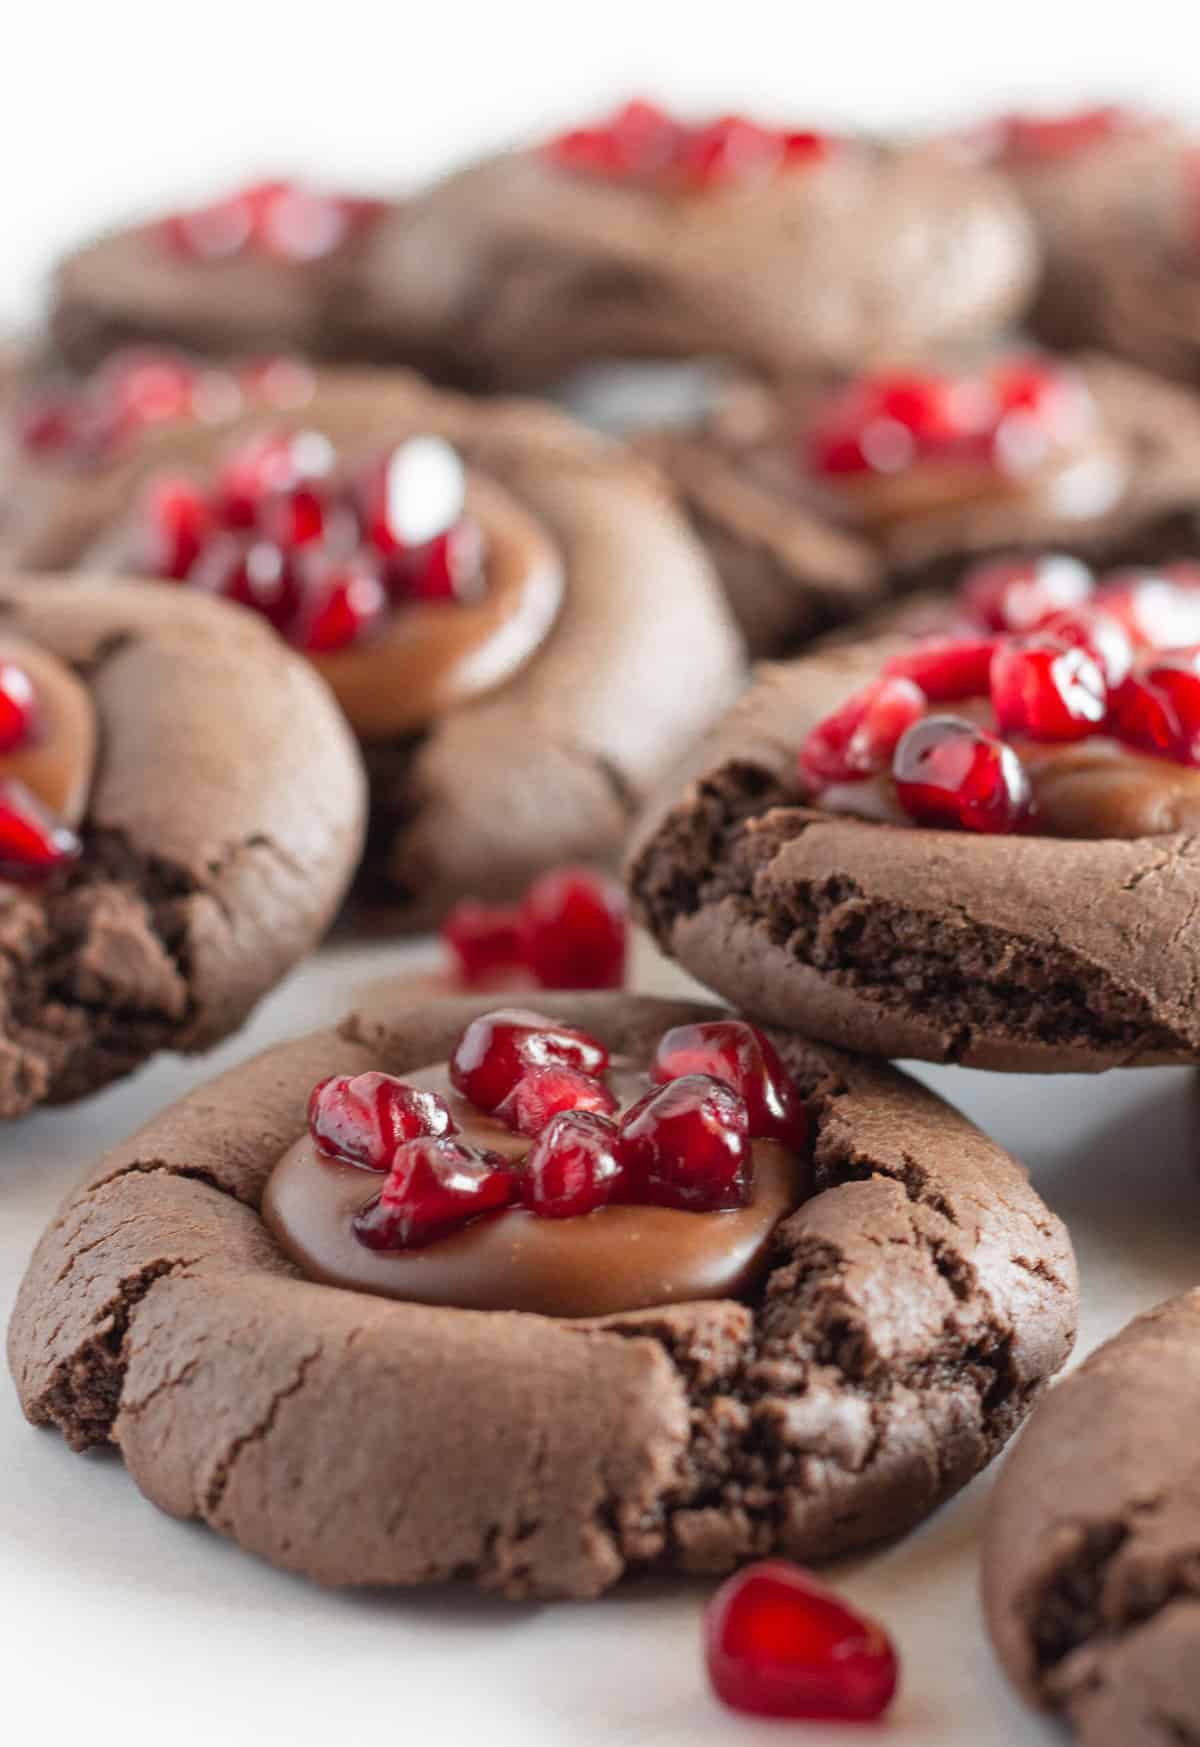 Chocolate cookies with chocolate ganache filling and pomegranate seeds.